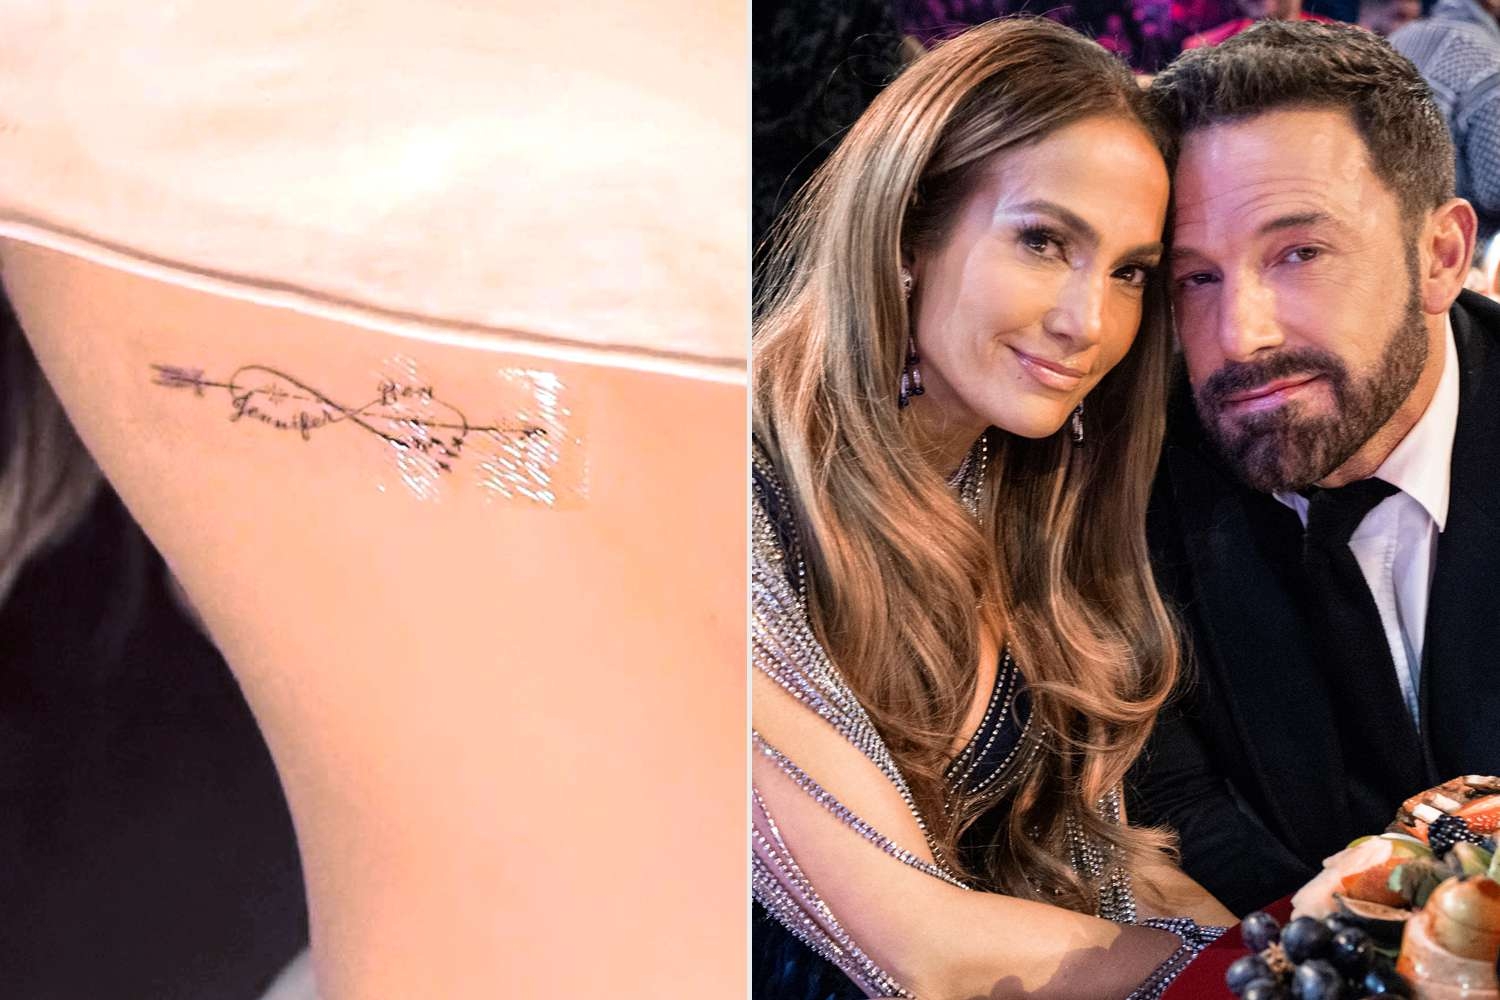 Marc Anthonys CoveredUp JLo Tattoo Is Front  Center in Fiancée Nadia  Ferreiras Engagement